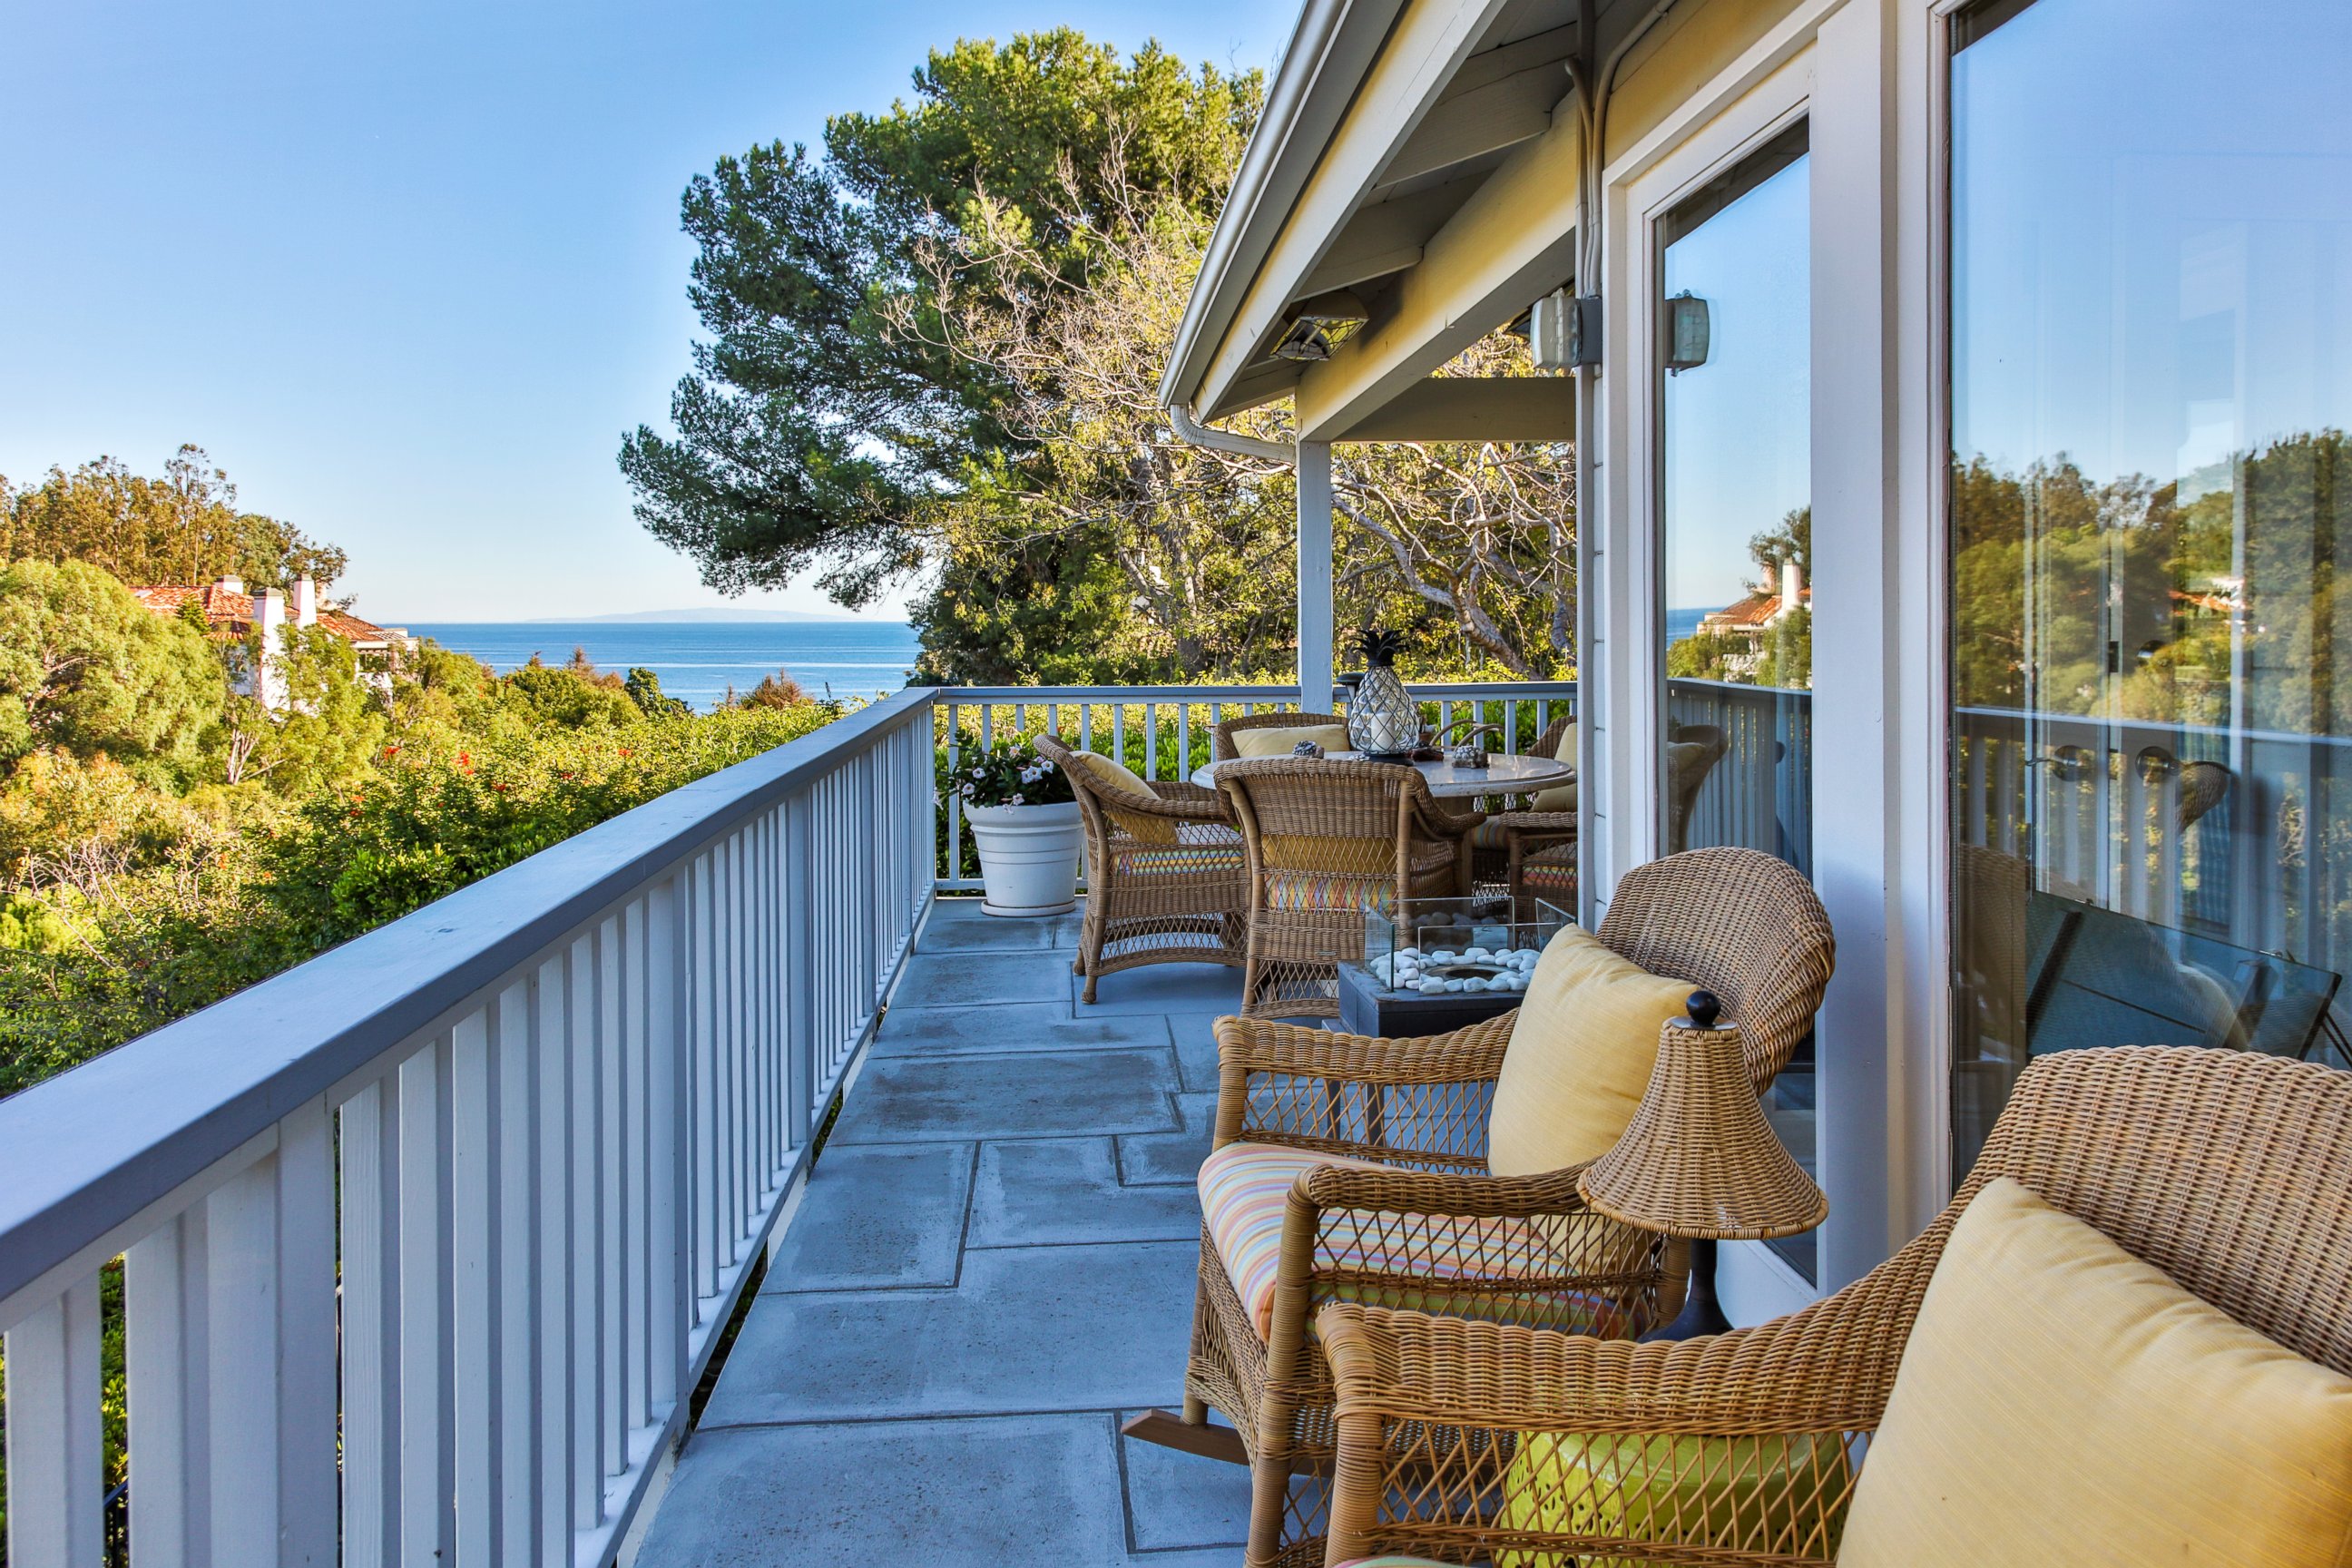 PHOTO: Legendary comedian Don Rickles' beach house in the Point Dume area of Malibu is on the market for $7.995 million.